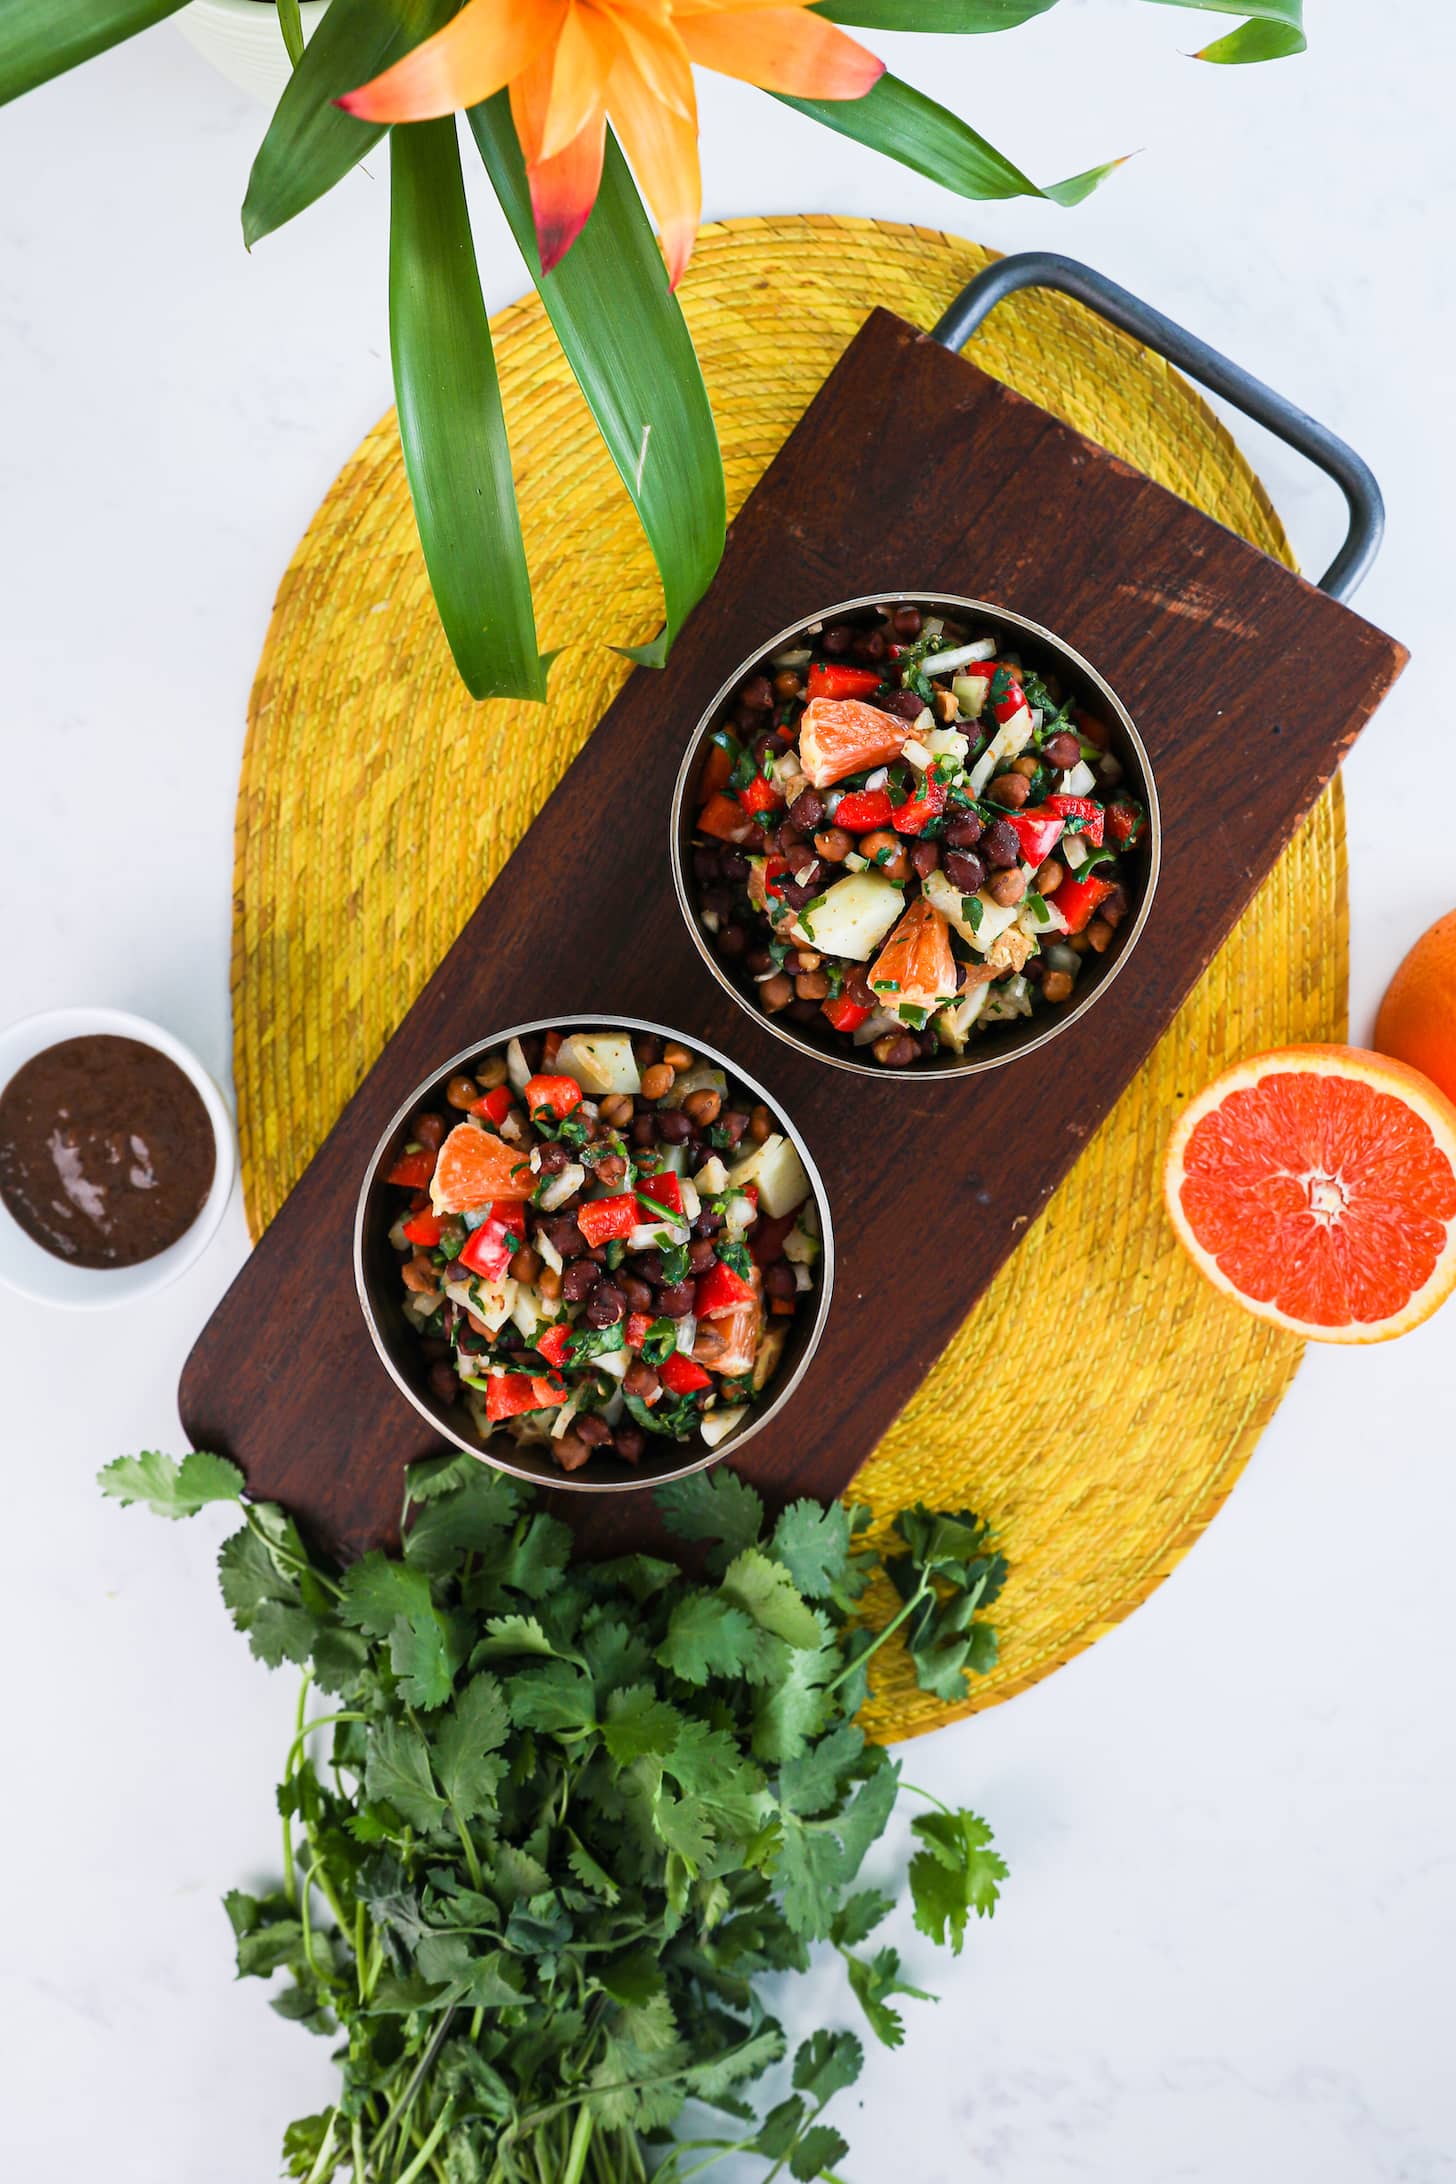 Overhead shot of two bowls of black chickpeas salad with orange cubes, peppers, potatoes and onion placed on a wooden board. Surrounded by a bunch of fresh herbs, orange halves, and a small bowl of brown sauce.